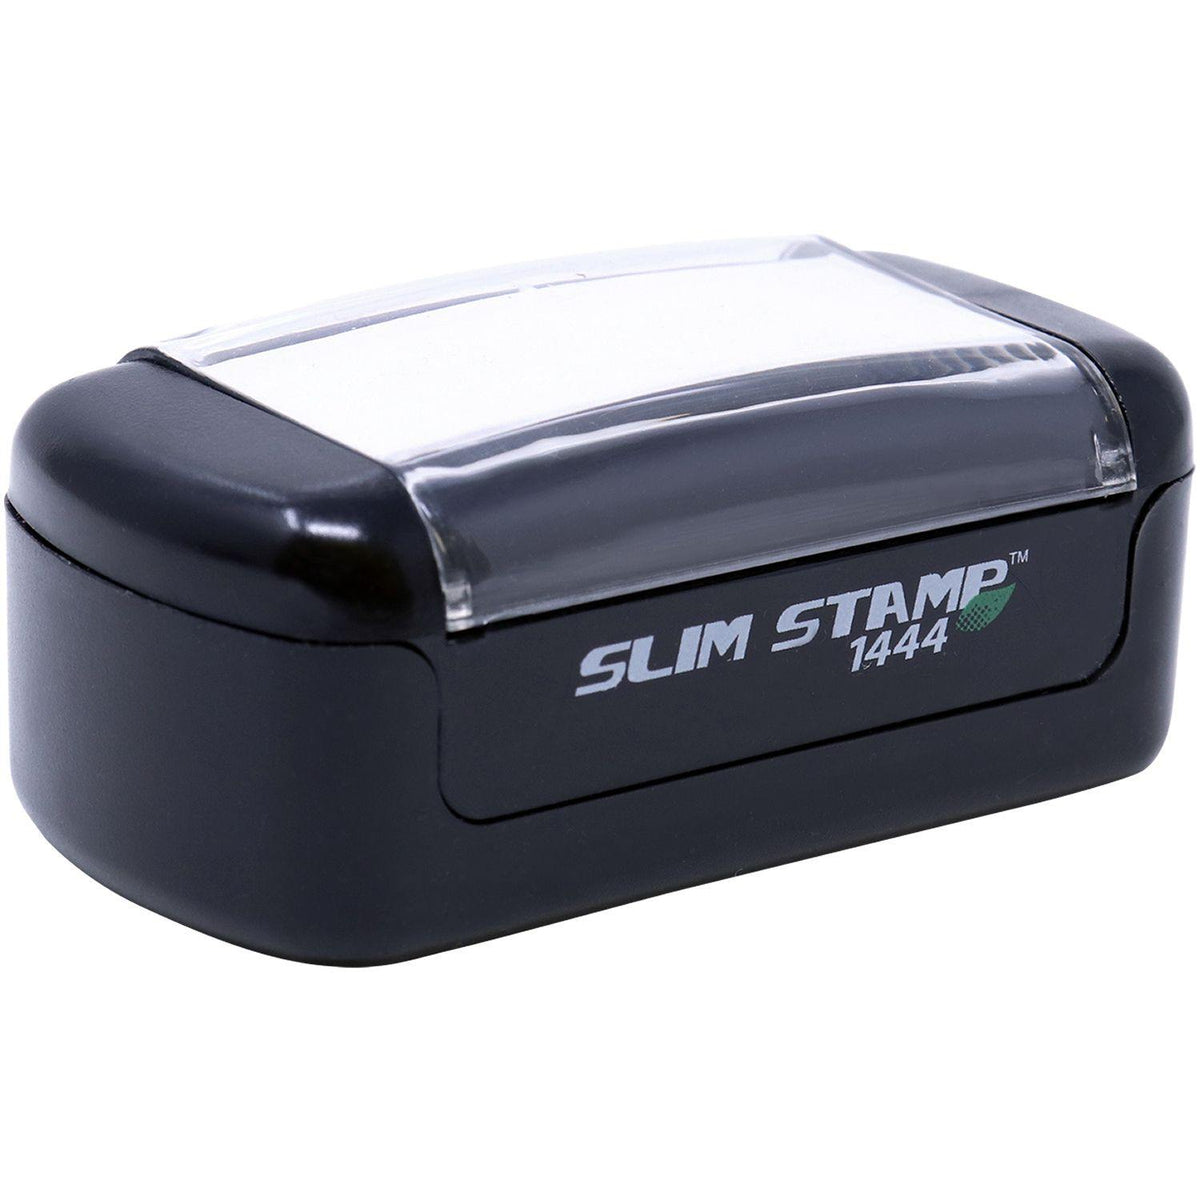 Alt View of Slim Pre-Inked You Insurance has Paid their portion Stamp Mount Angle